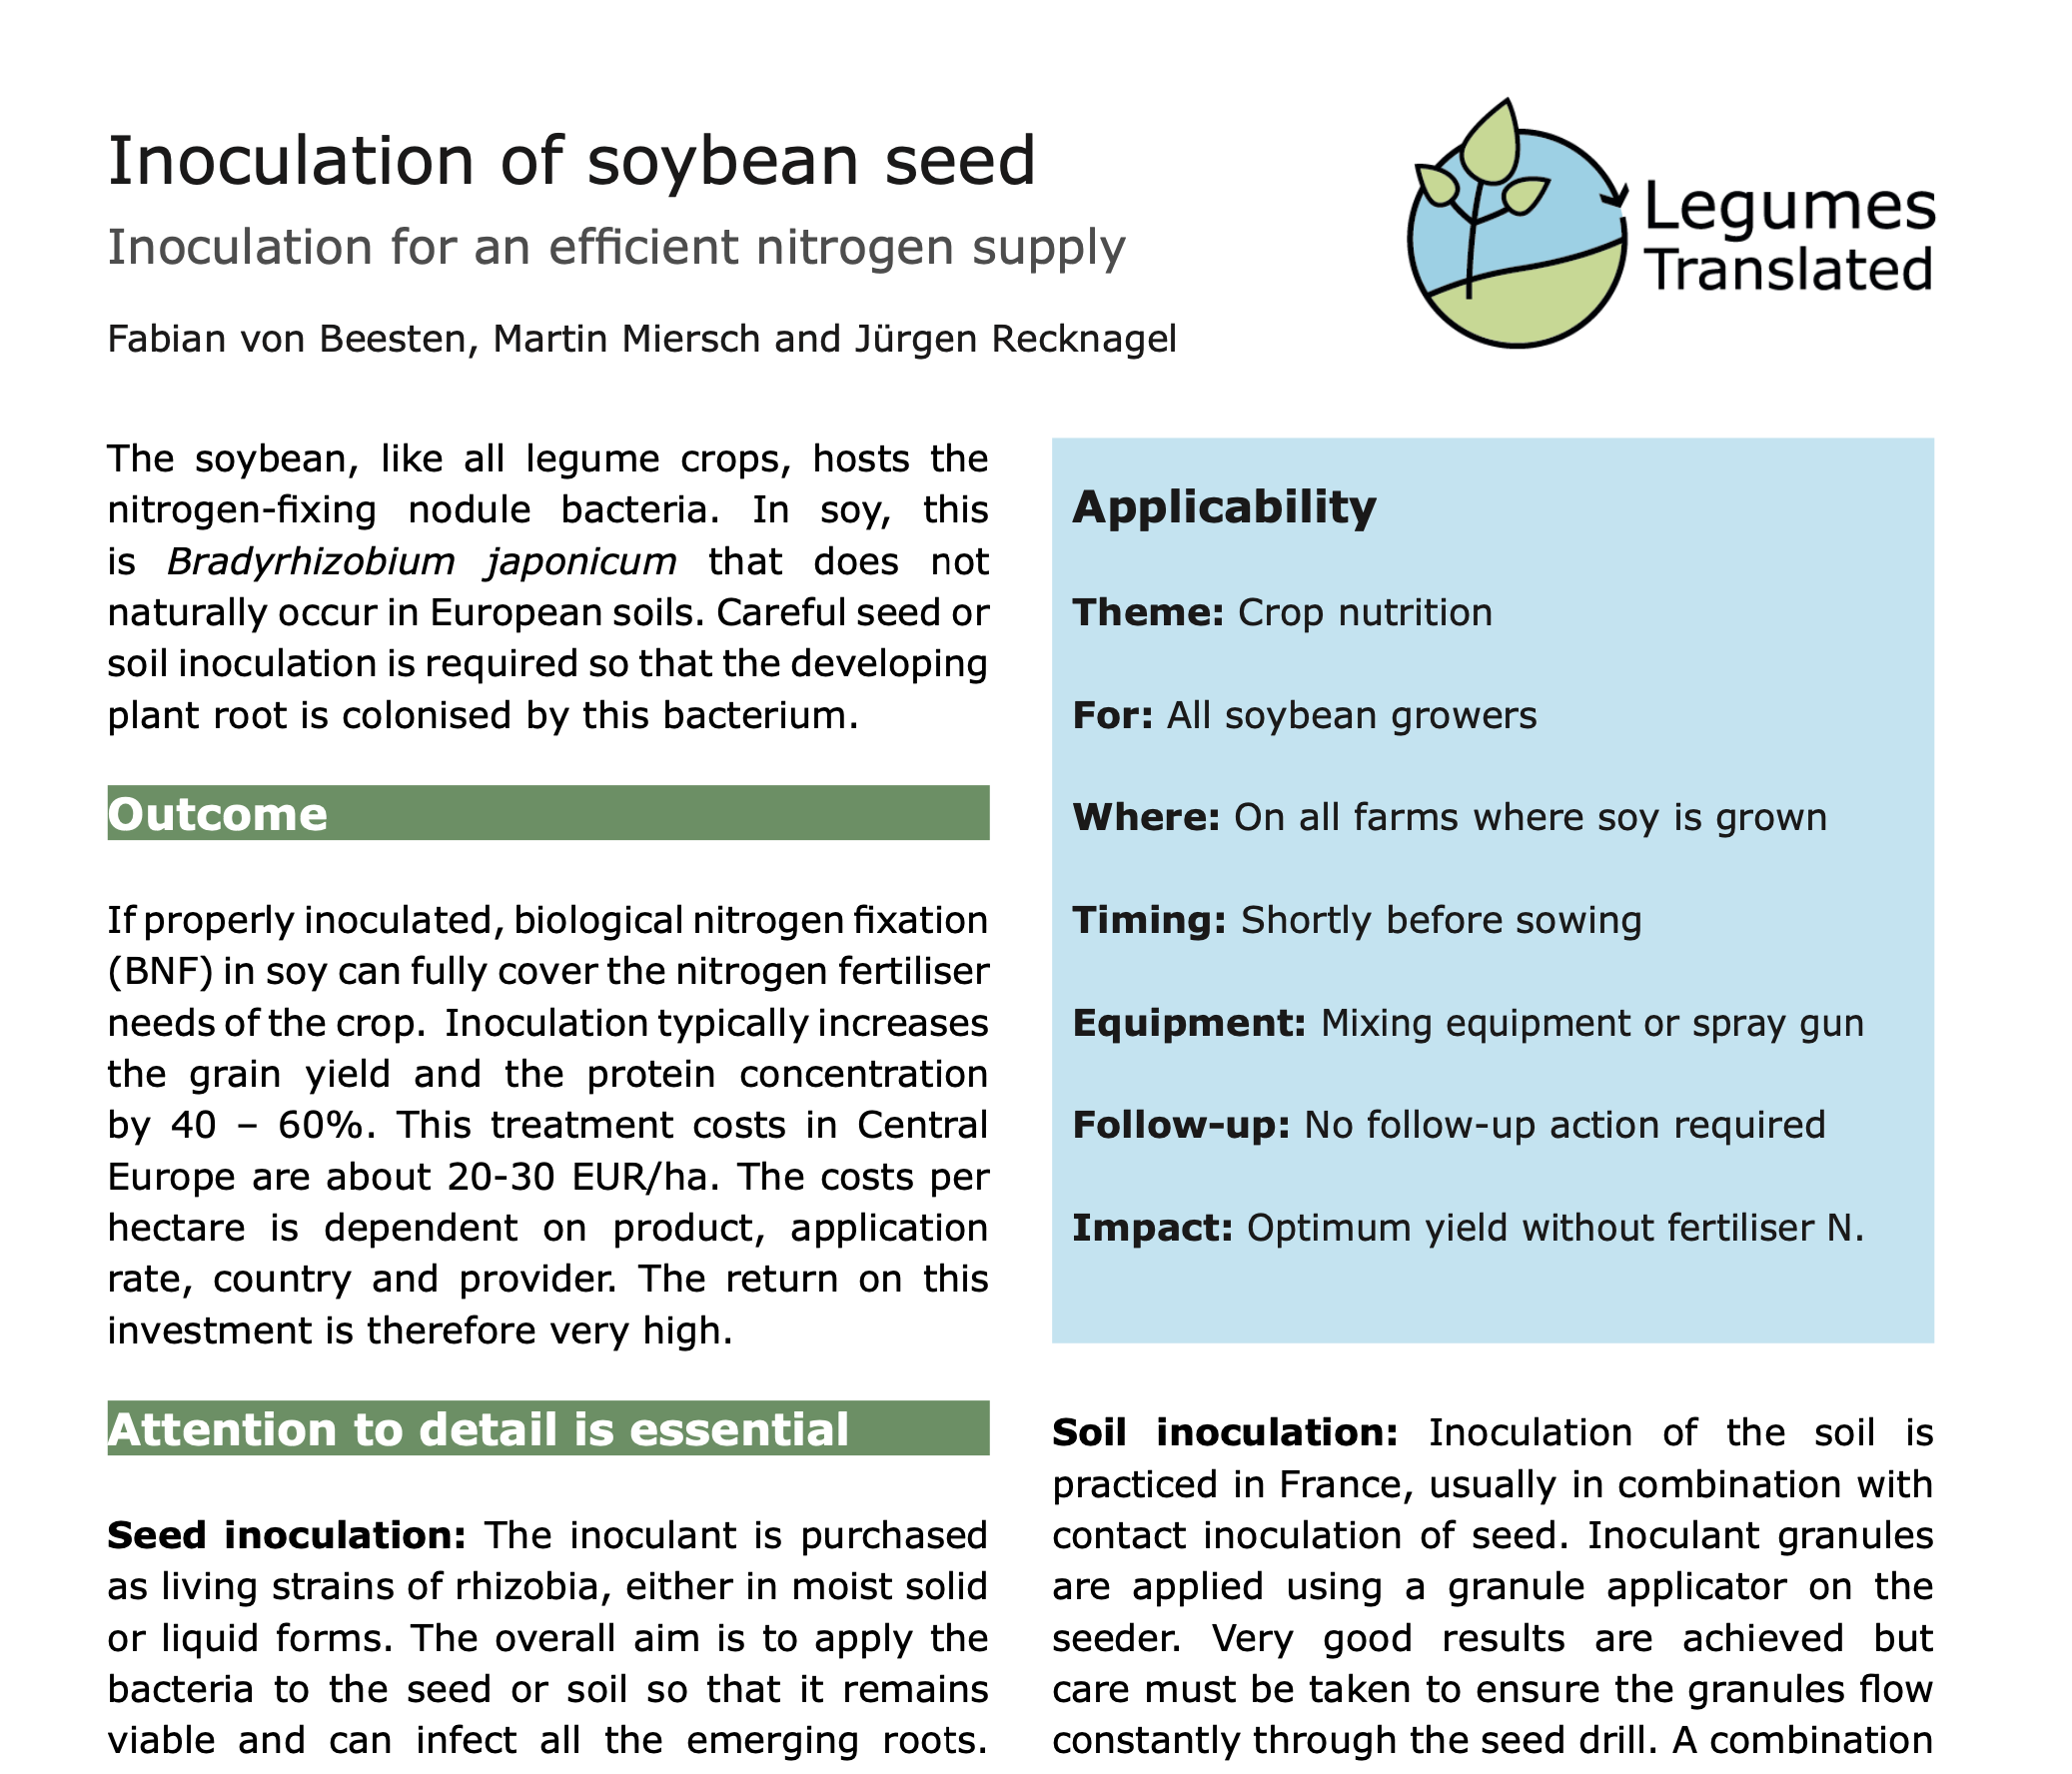 Inoculation of soybean seed – inoculation for an efficient nitrogen supply